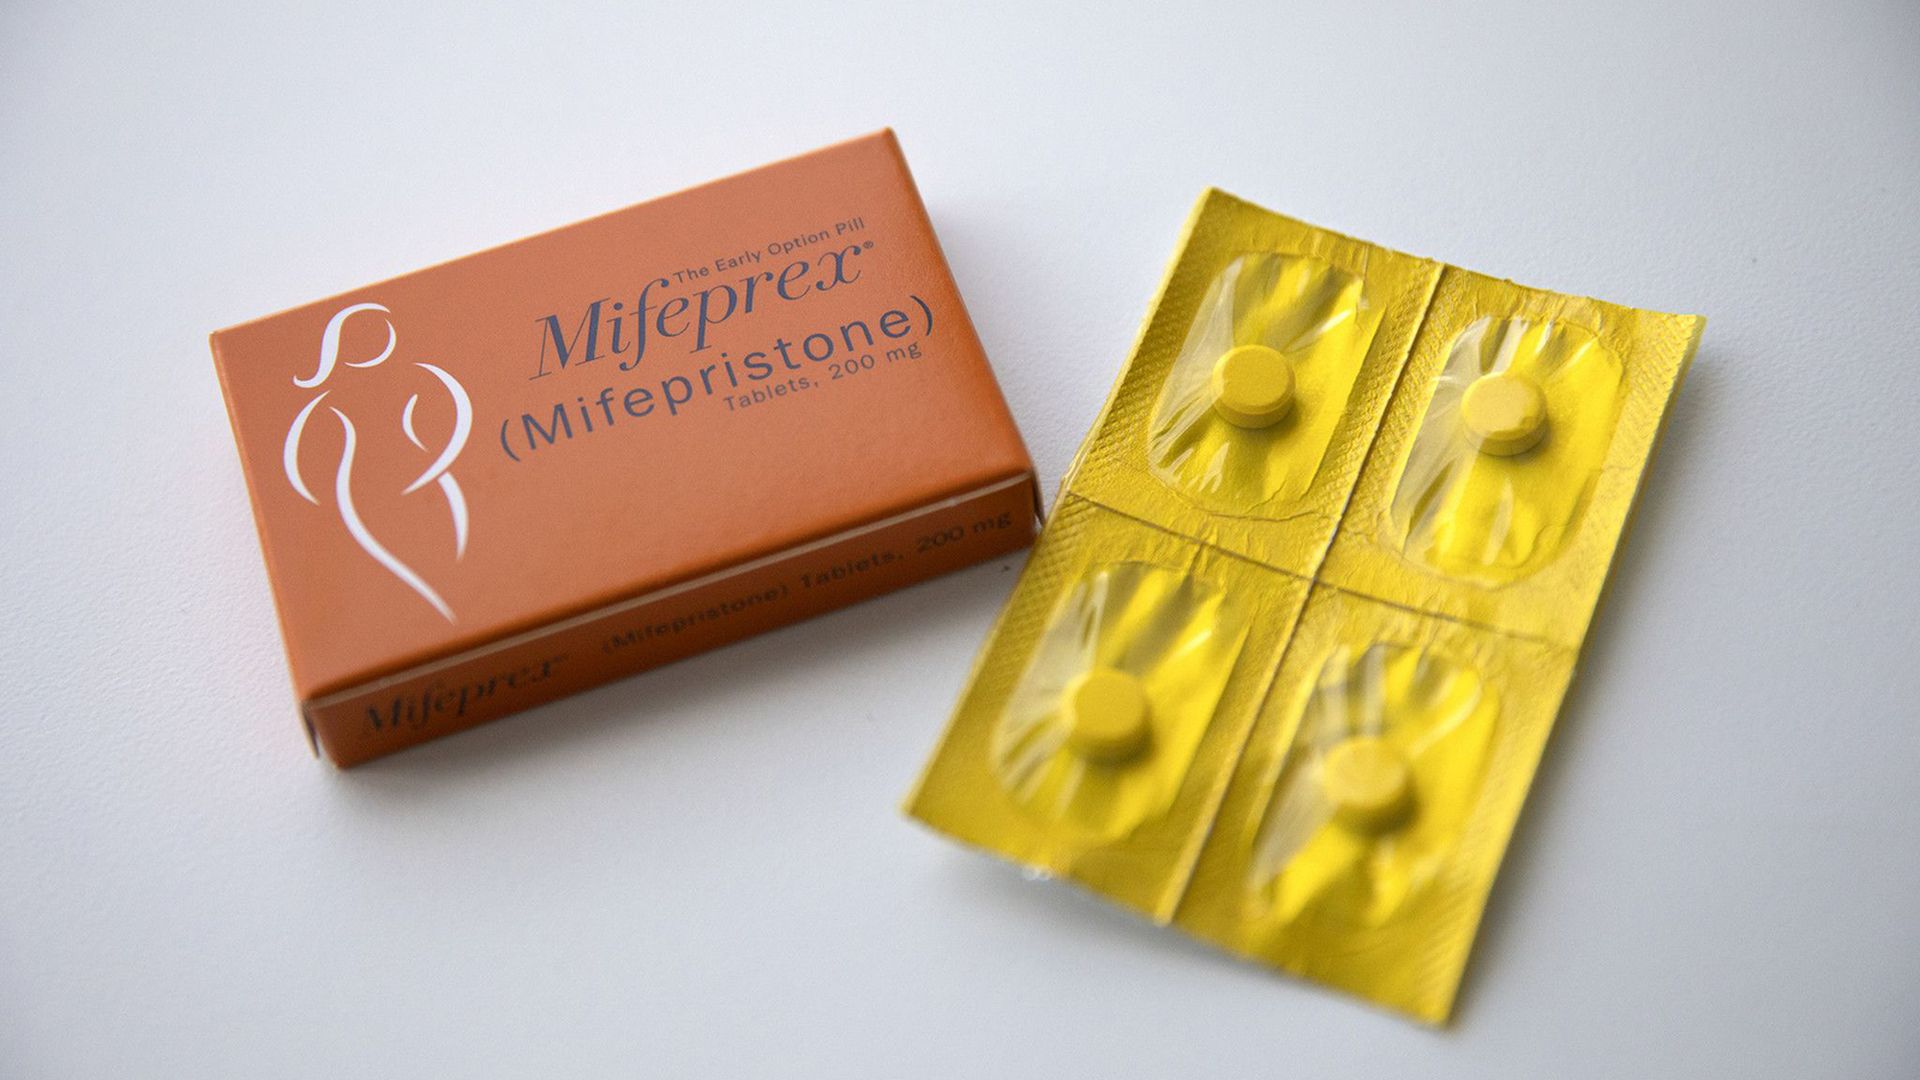 Mifepristone in an orange box and yellow pill blisters of misoprostol